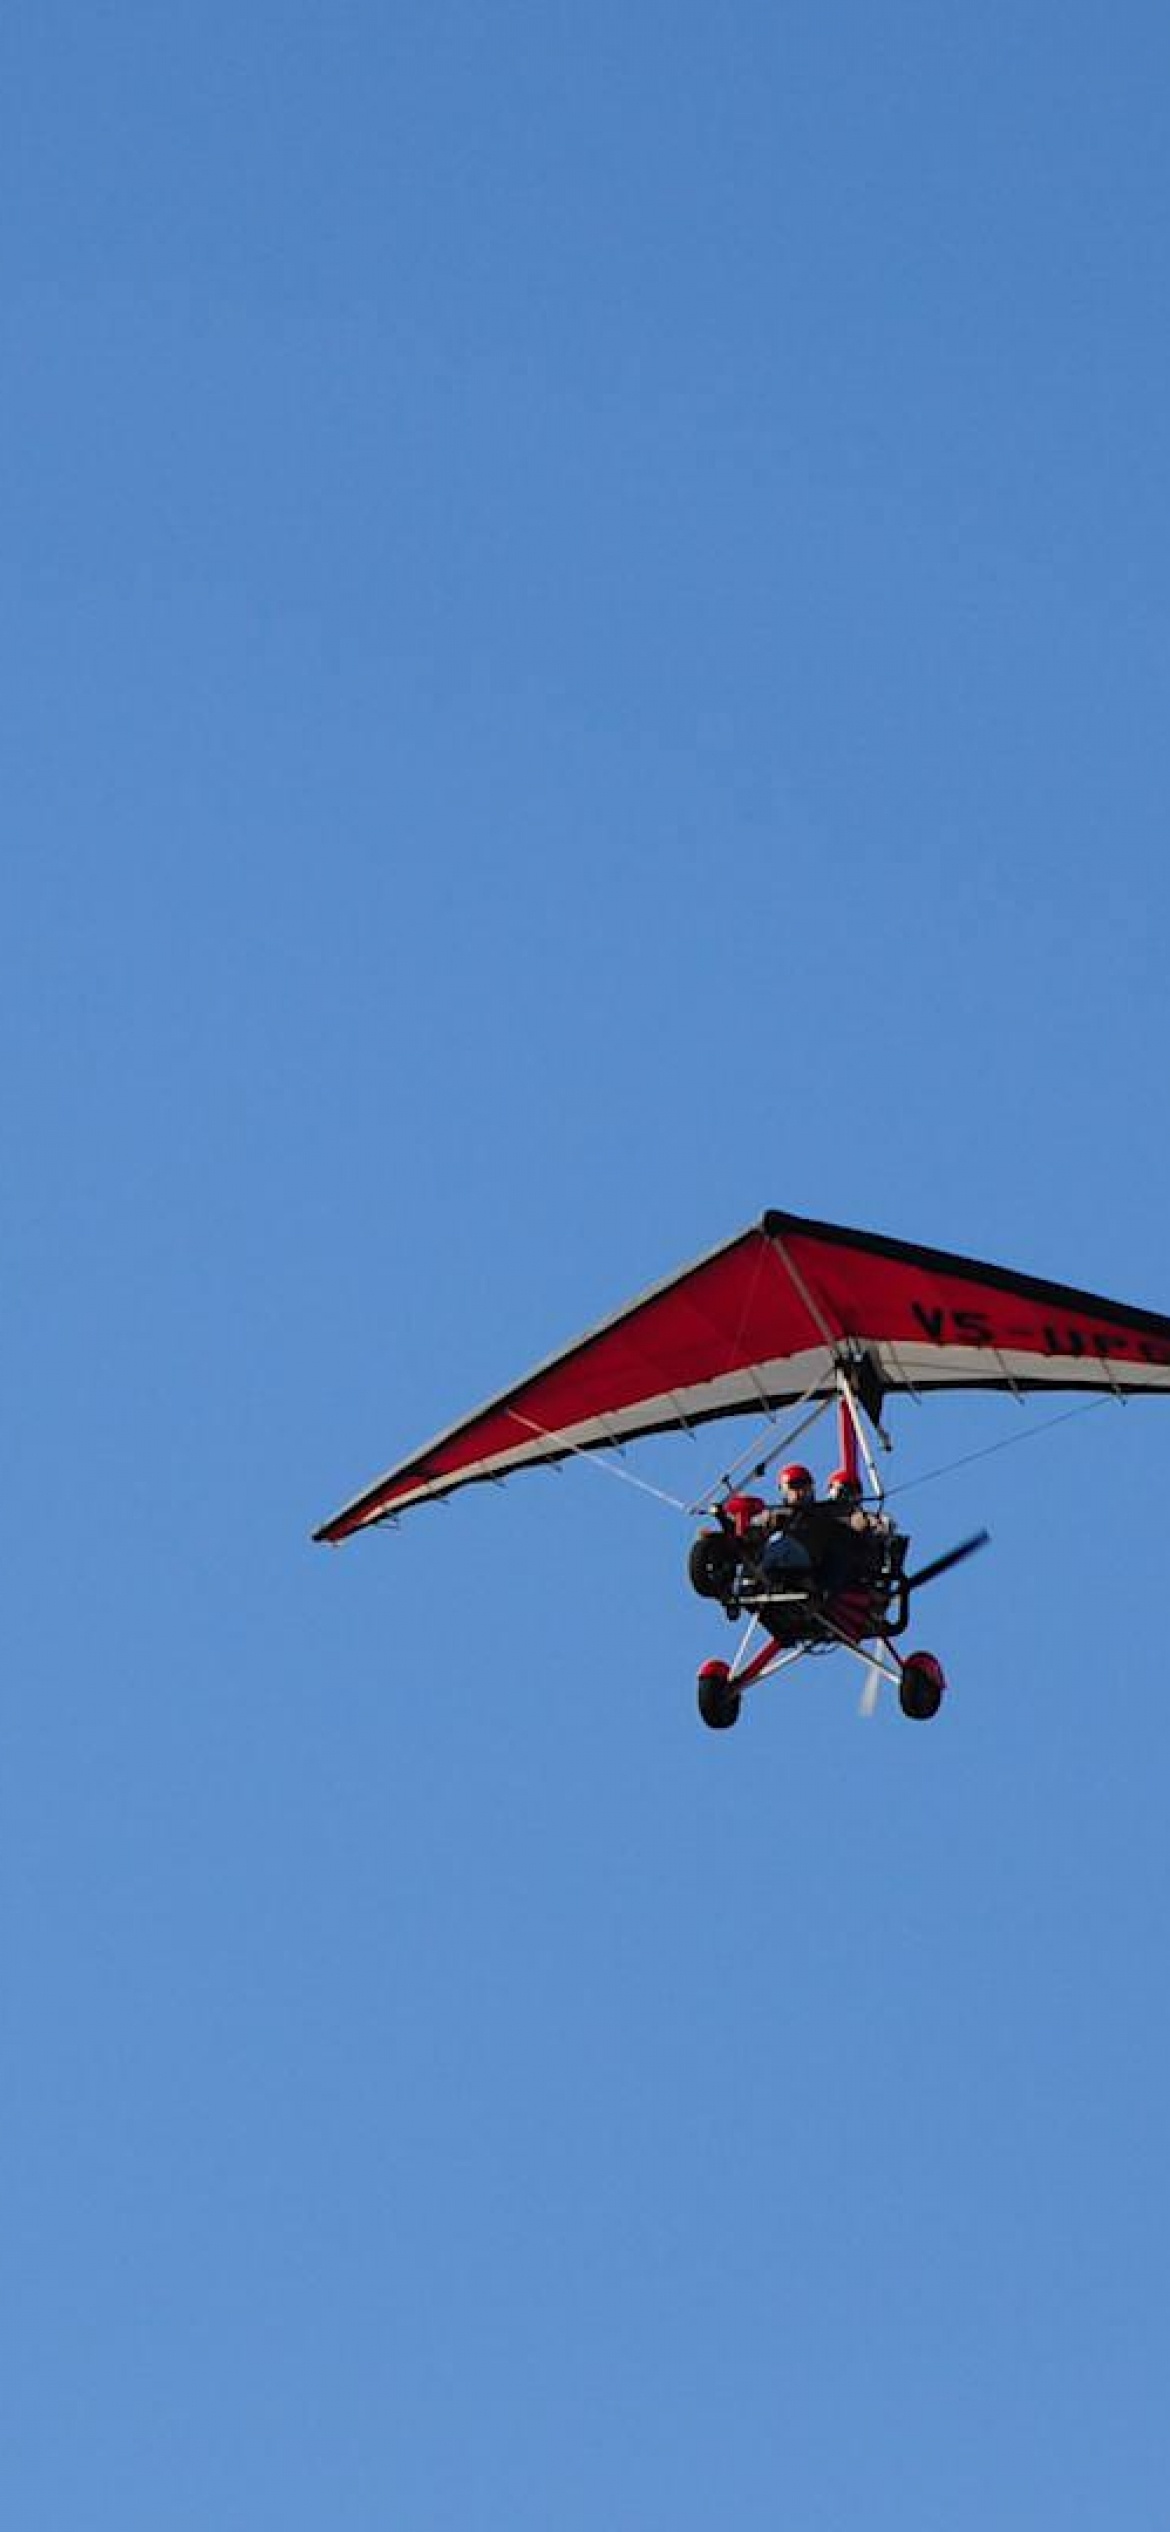 Hang Gliding: Initial flights, Paragliding, Powered hang glider, A lightweight frame with wings. 1170x2540 HD Background.